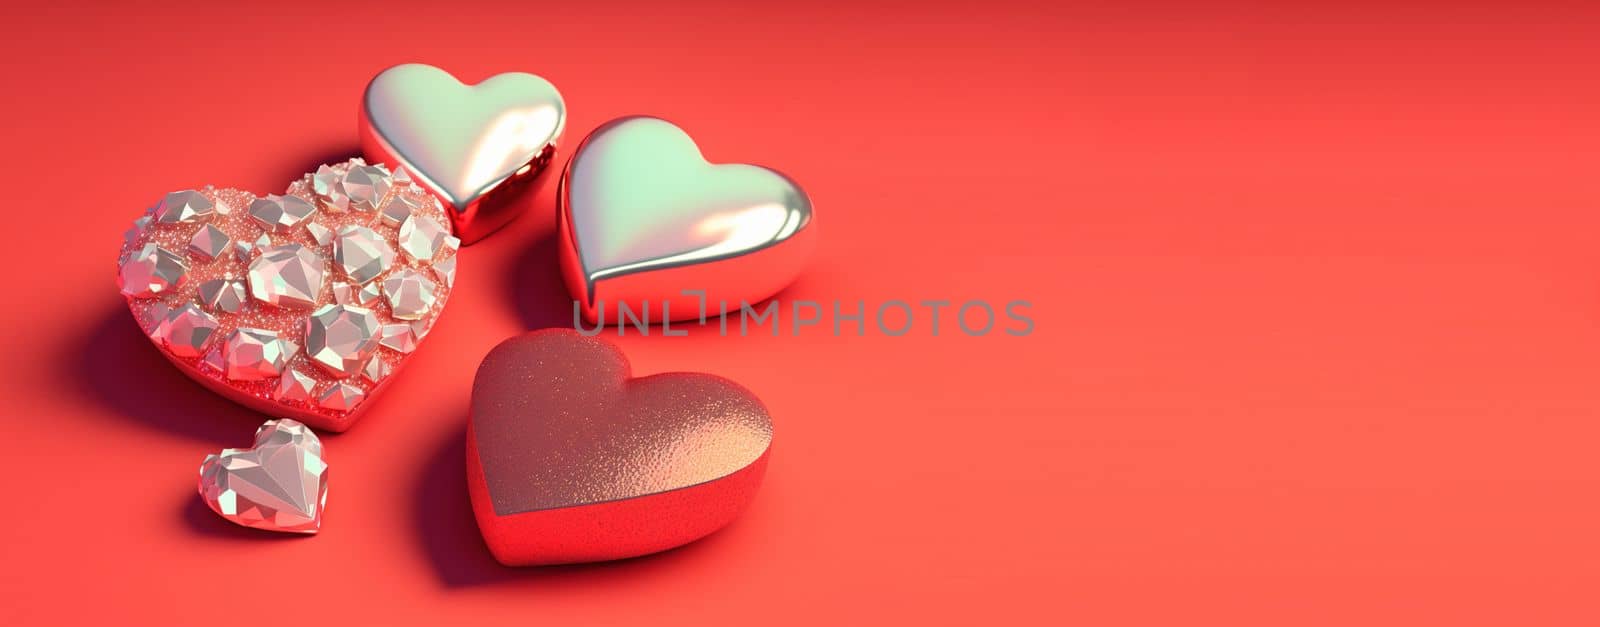 Shimmering 3D Heart Shape, Diamond, and Crystal Design for Valentine's Day Background and Banner by templator